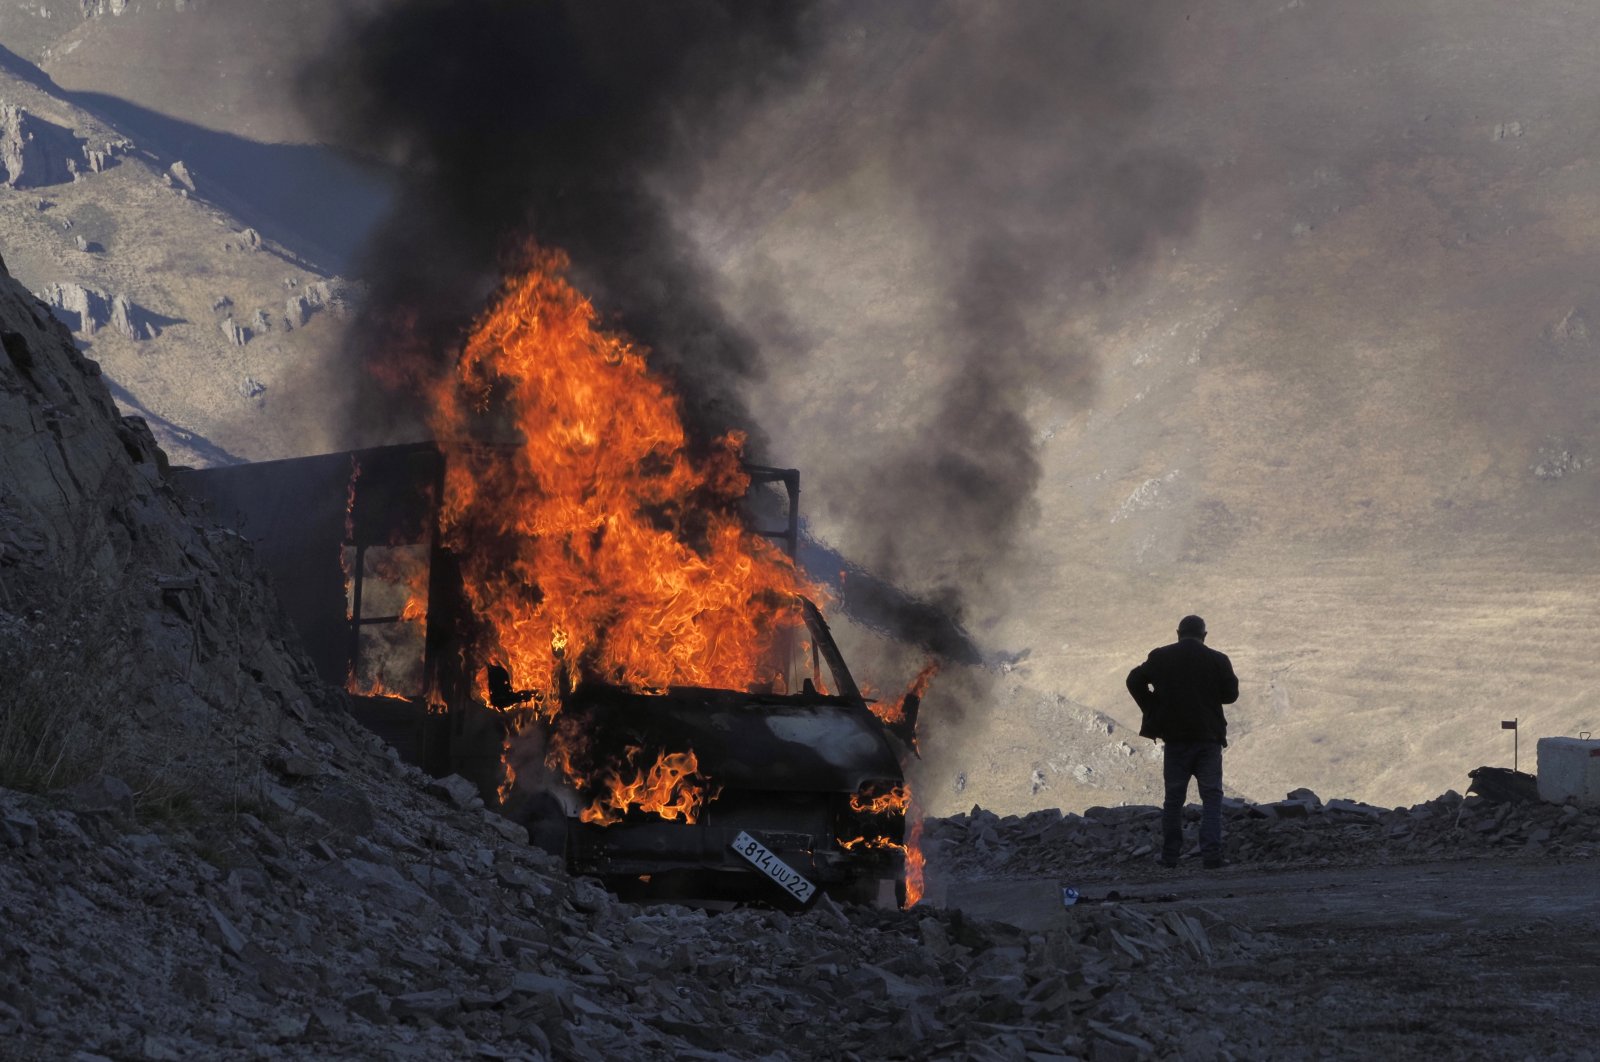 A man stands near his burning car which caught on fire during the climb along the road to a mountain pass, near the border between Nagorno-Karabakh and Armenia, Sunday, Nov. 8, 2020. (AP Photo)